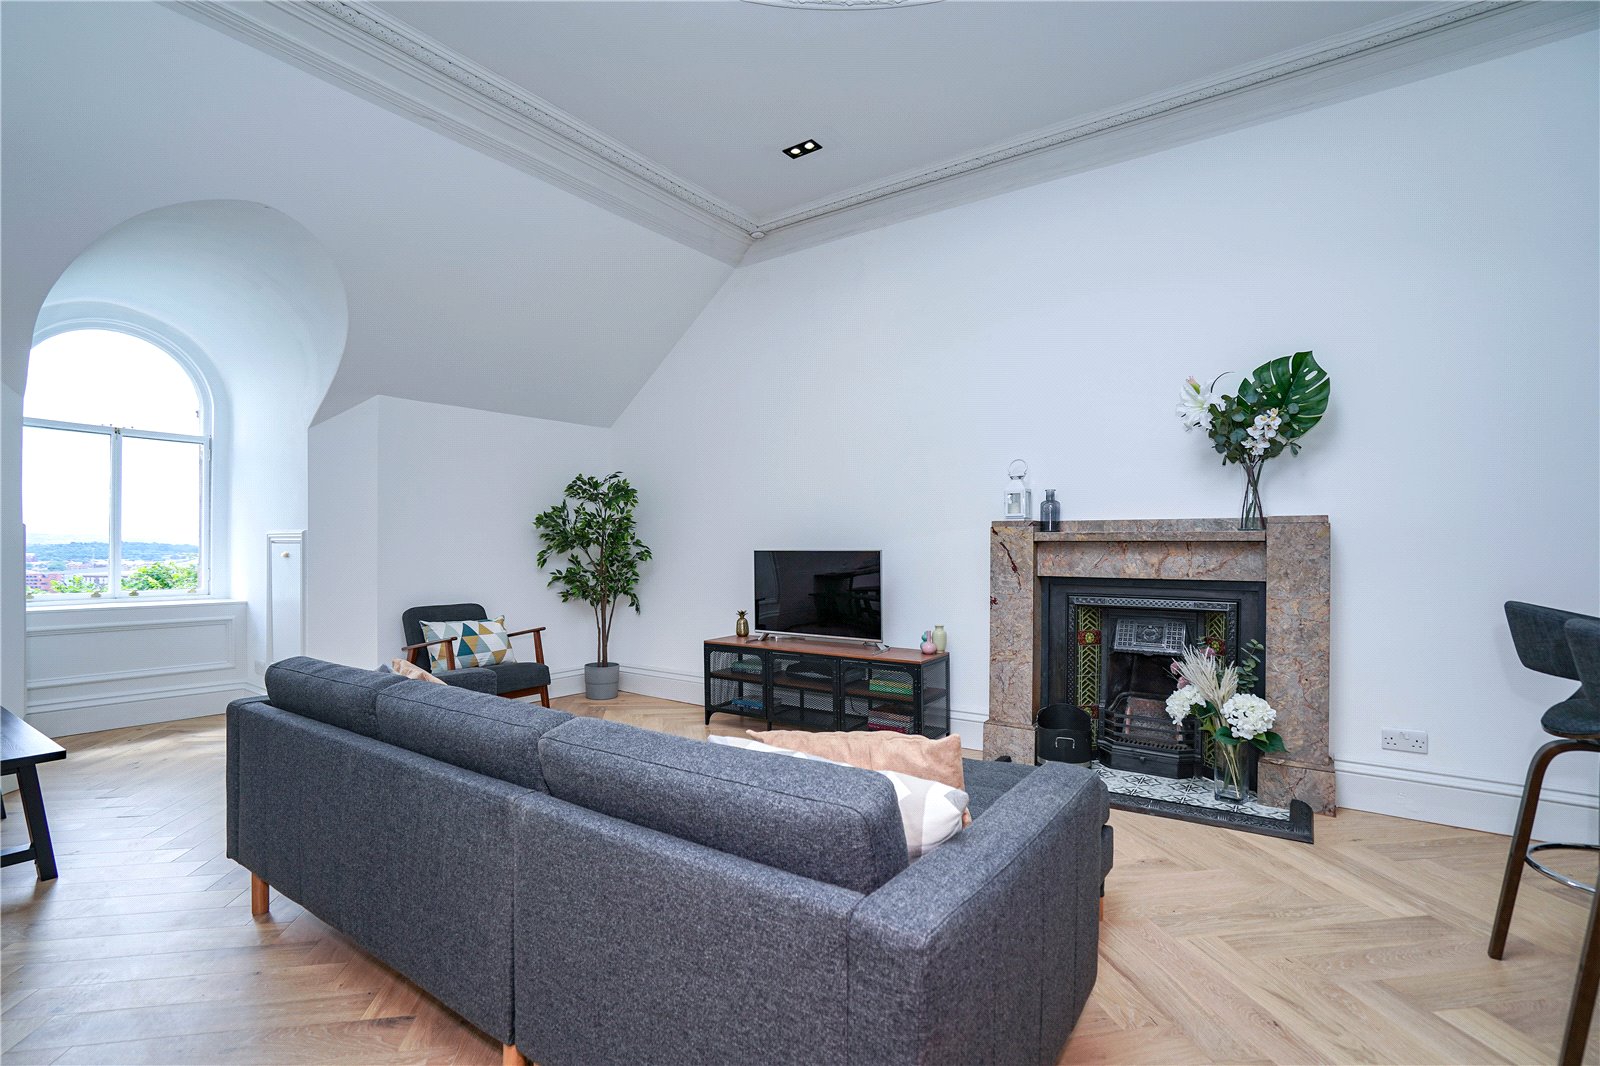 Glasgow Property of the Week (2nd July 2022)